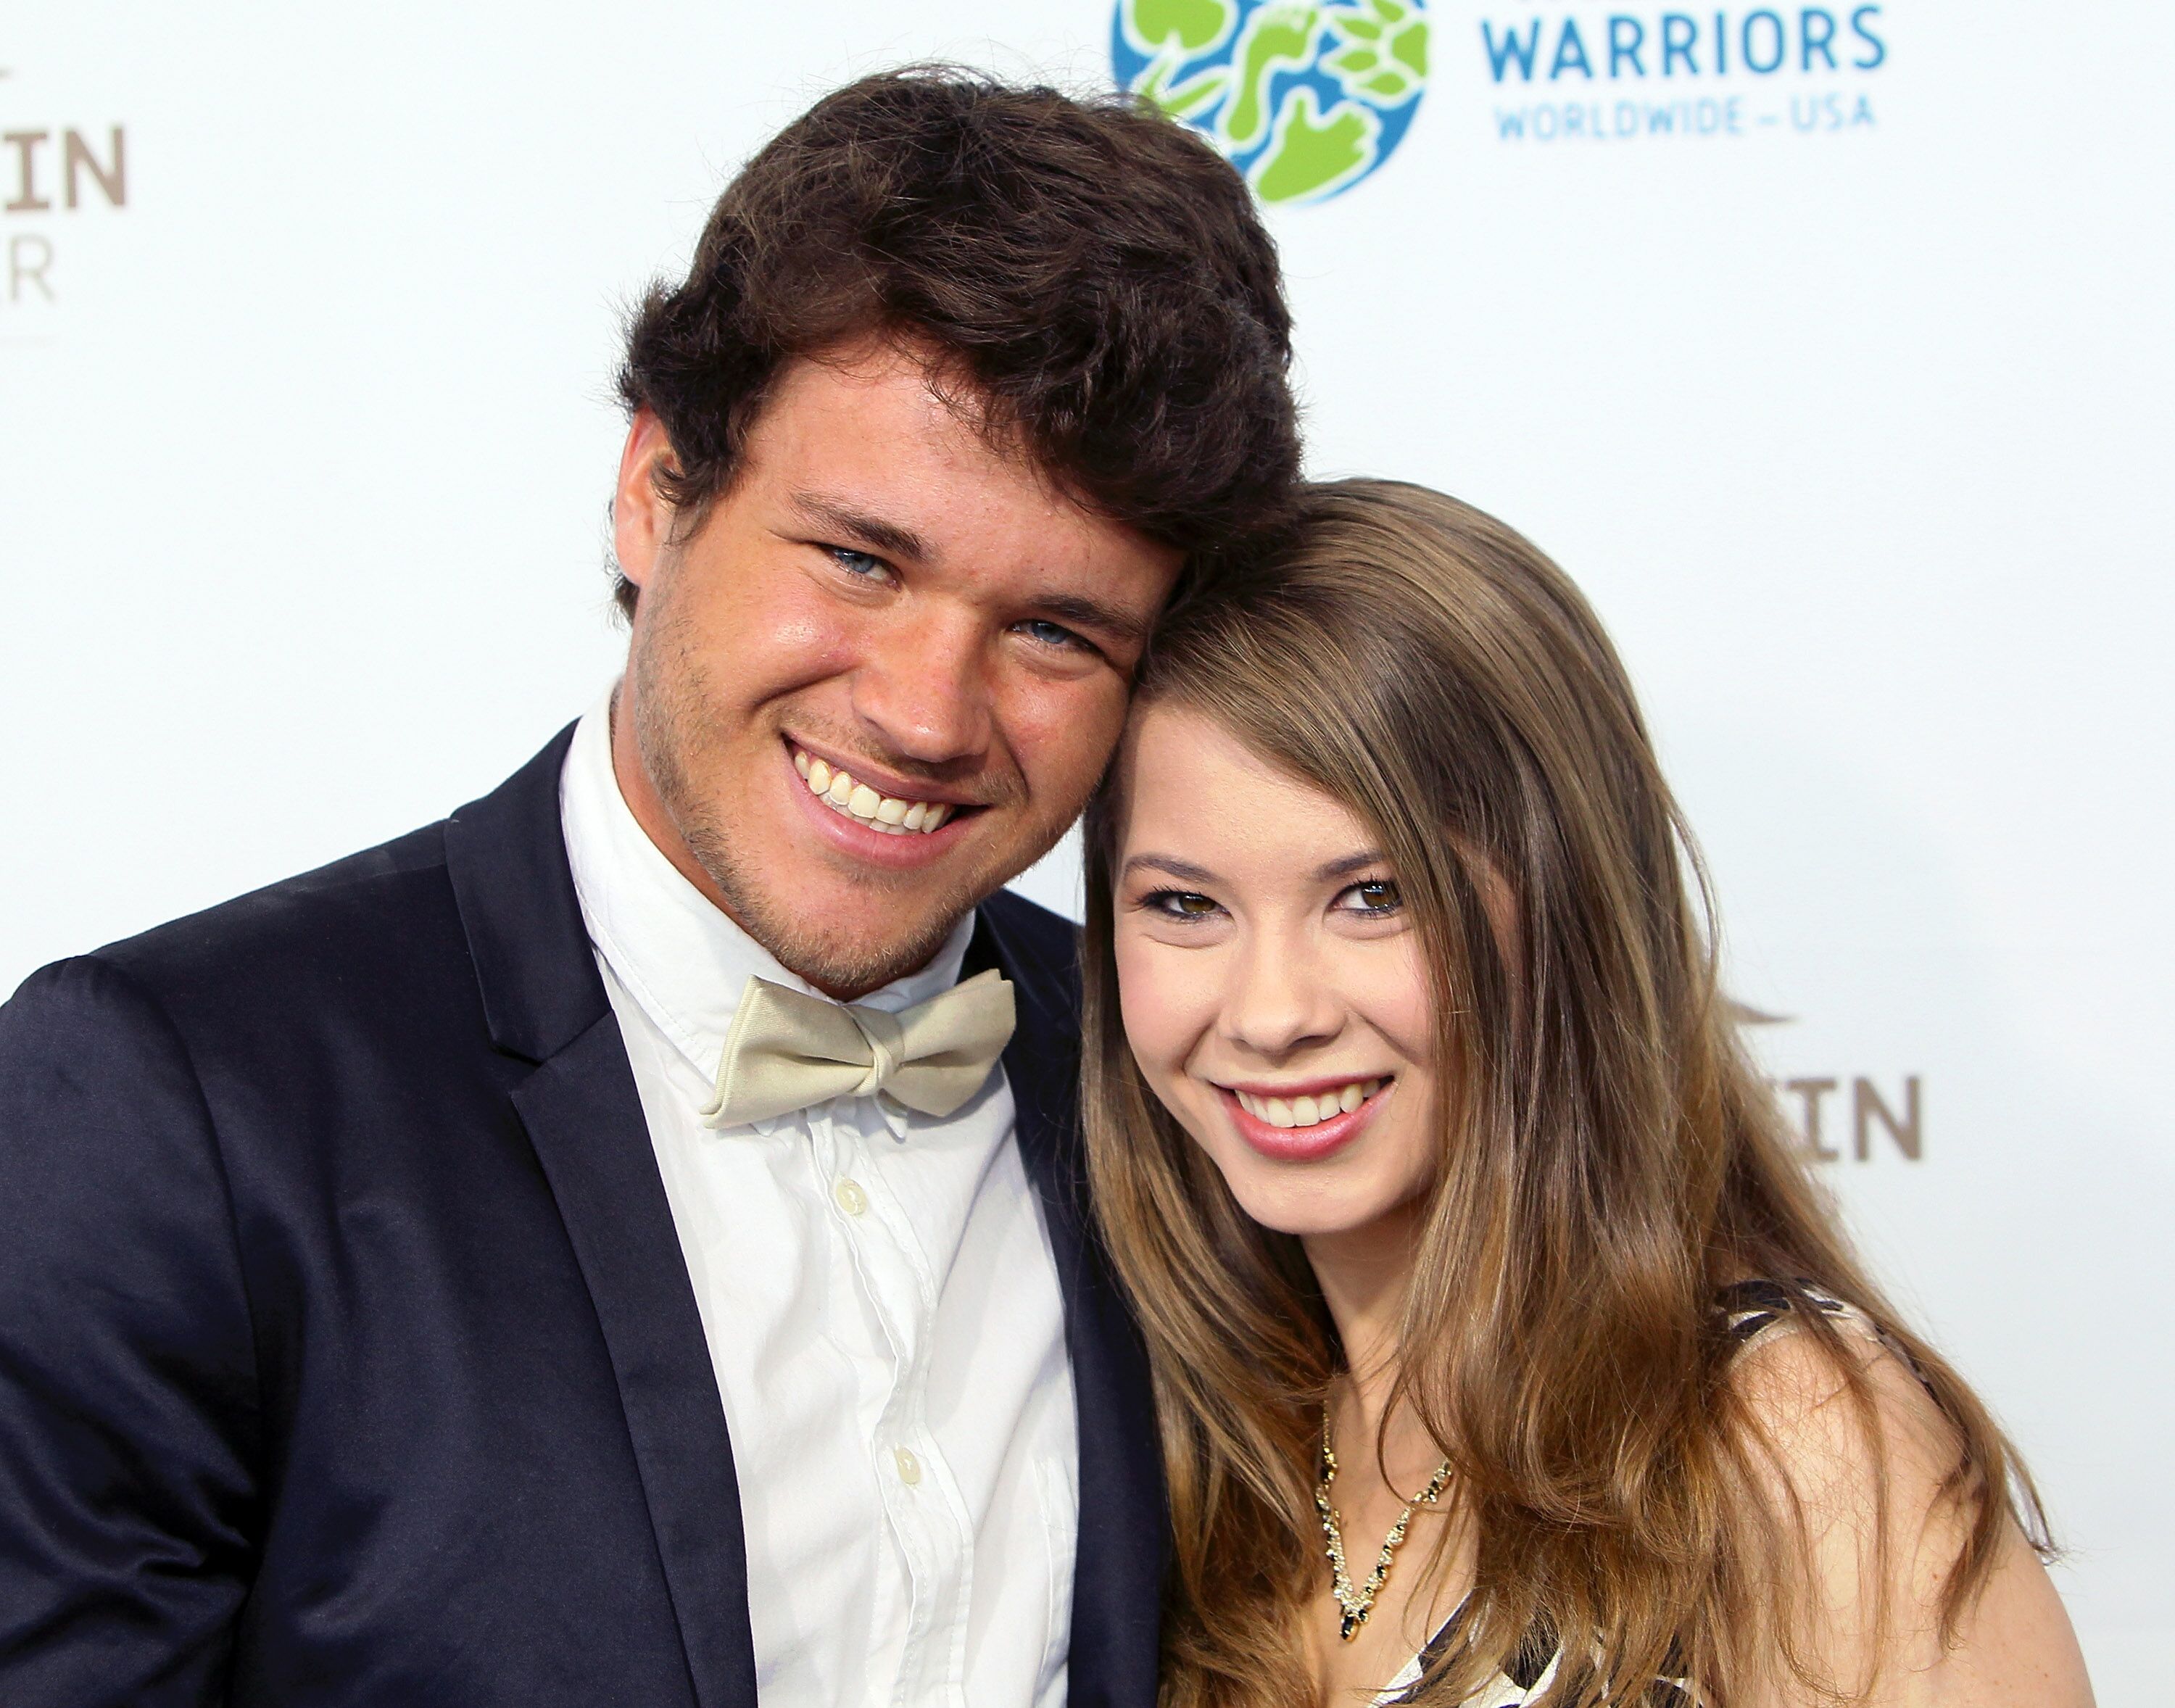 Chandler Powell and Bindi Irwin attend the Steve Irwin Gala Dinner in 2016 in Los Angeles | Source: Getty Images